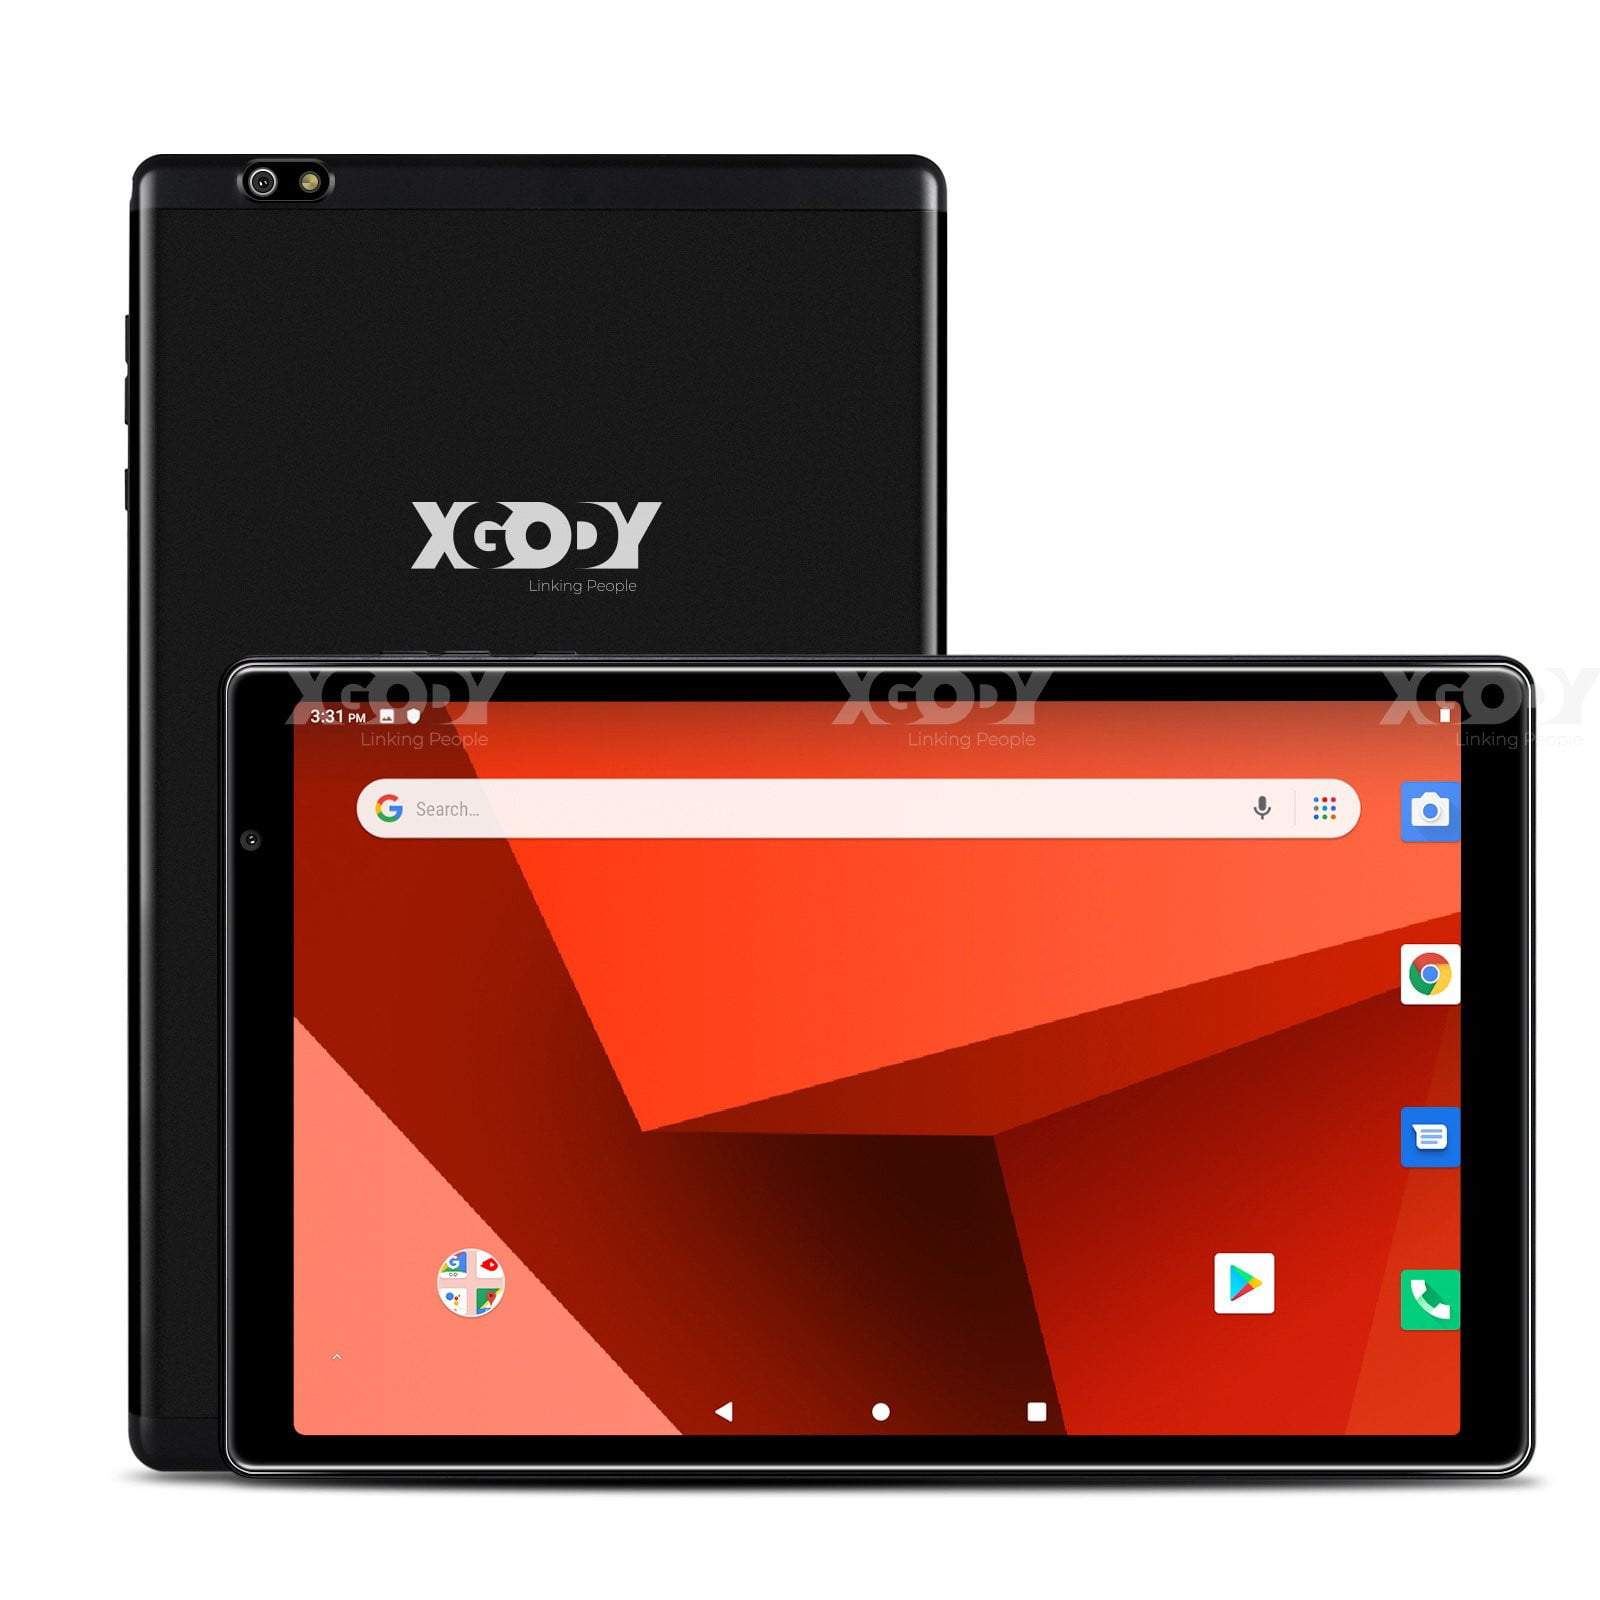 Cost-effective and Most worthwhile XGODY Y101 10.1" Quad Core Slim Tablet - XGODY 